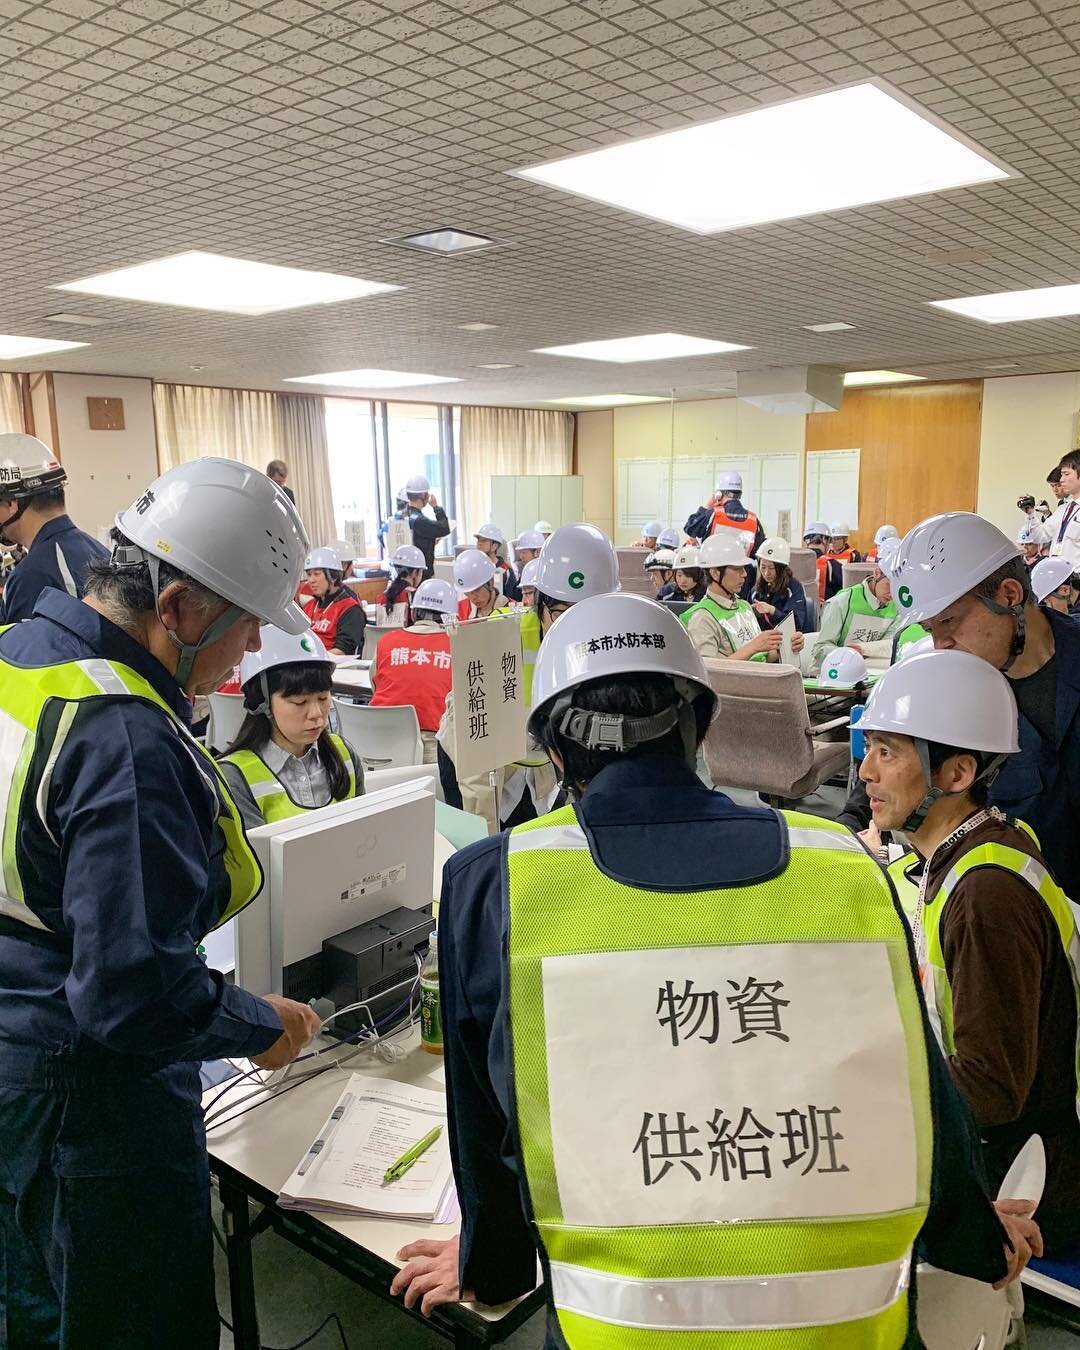 Risk Map testing for evacuation shelter management in Kumamoto, Japan. 13,500 people participated in the city-wide drill.